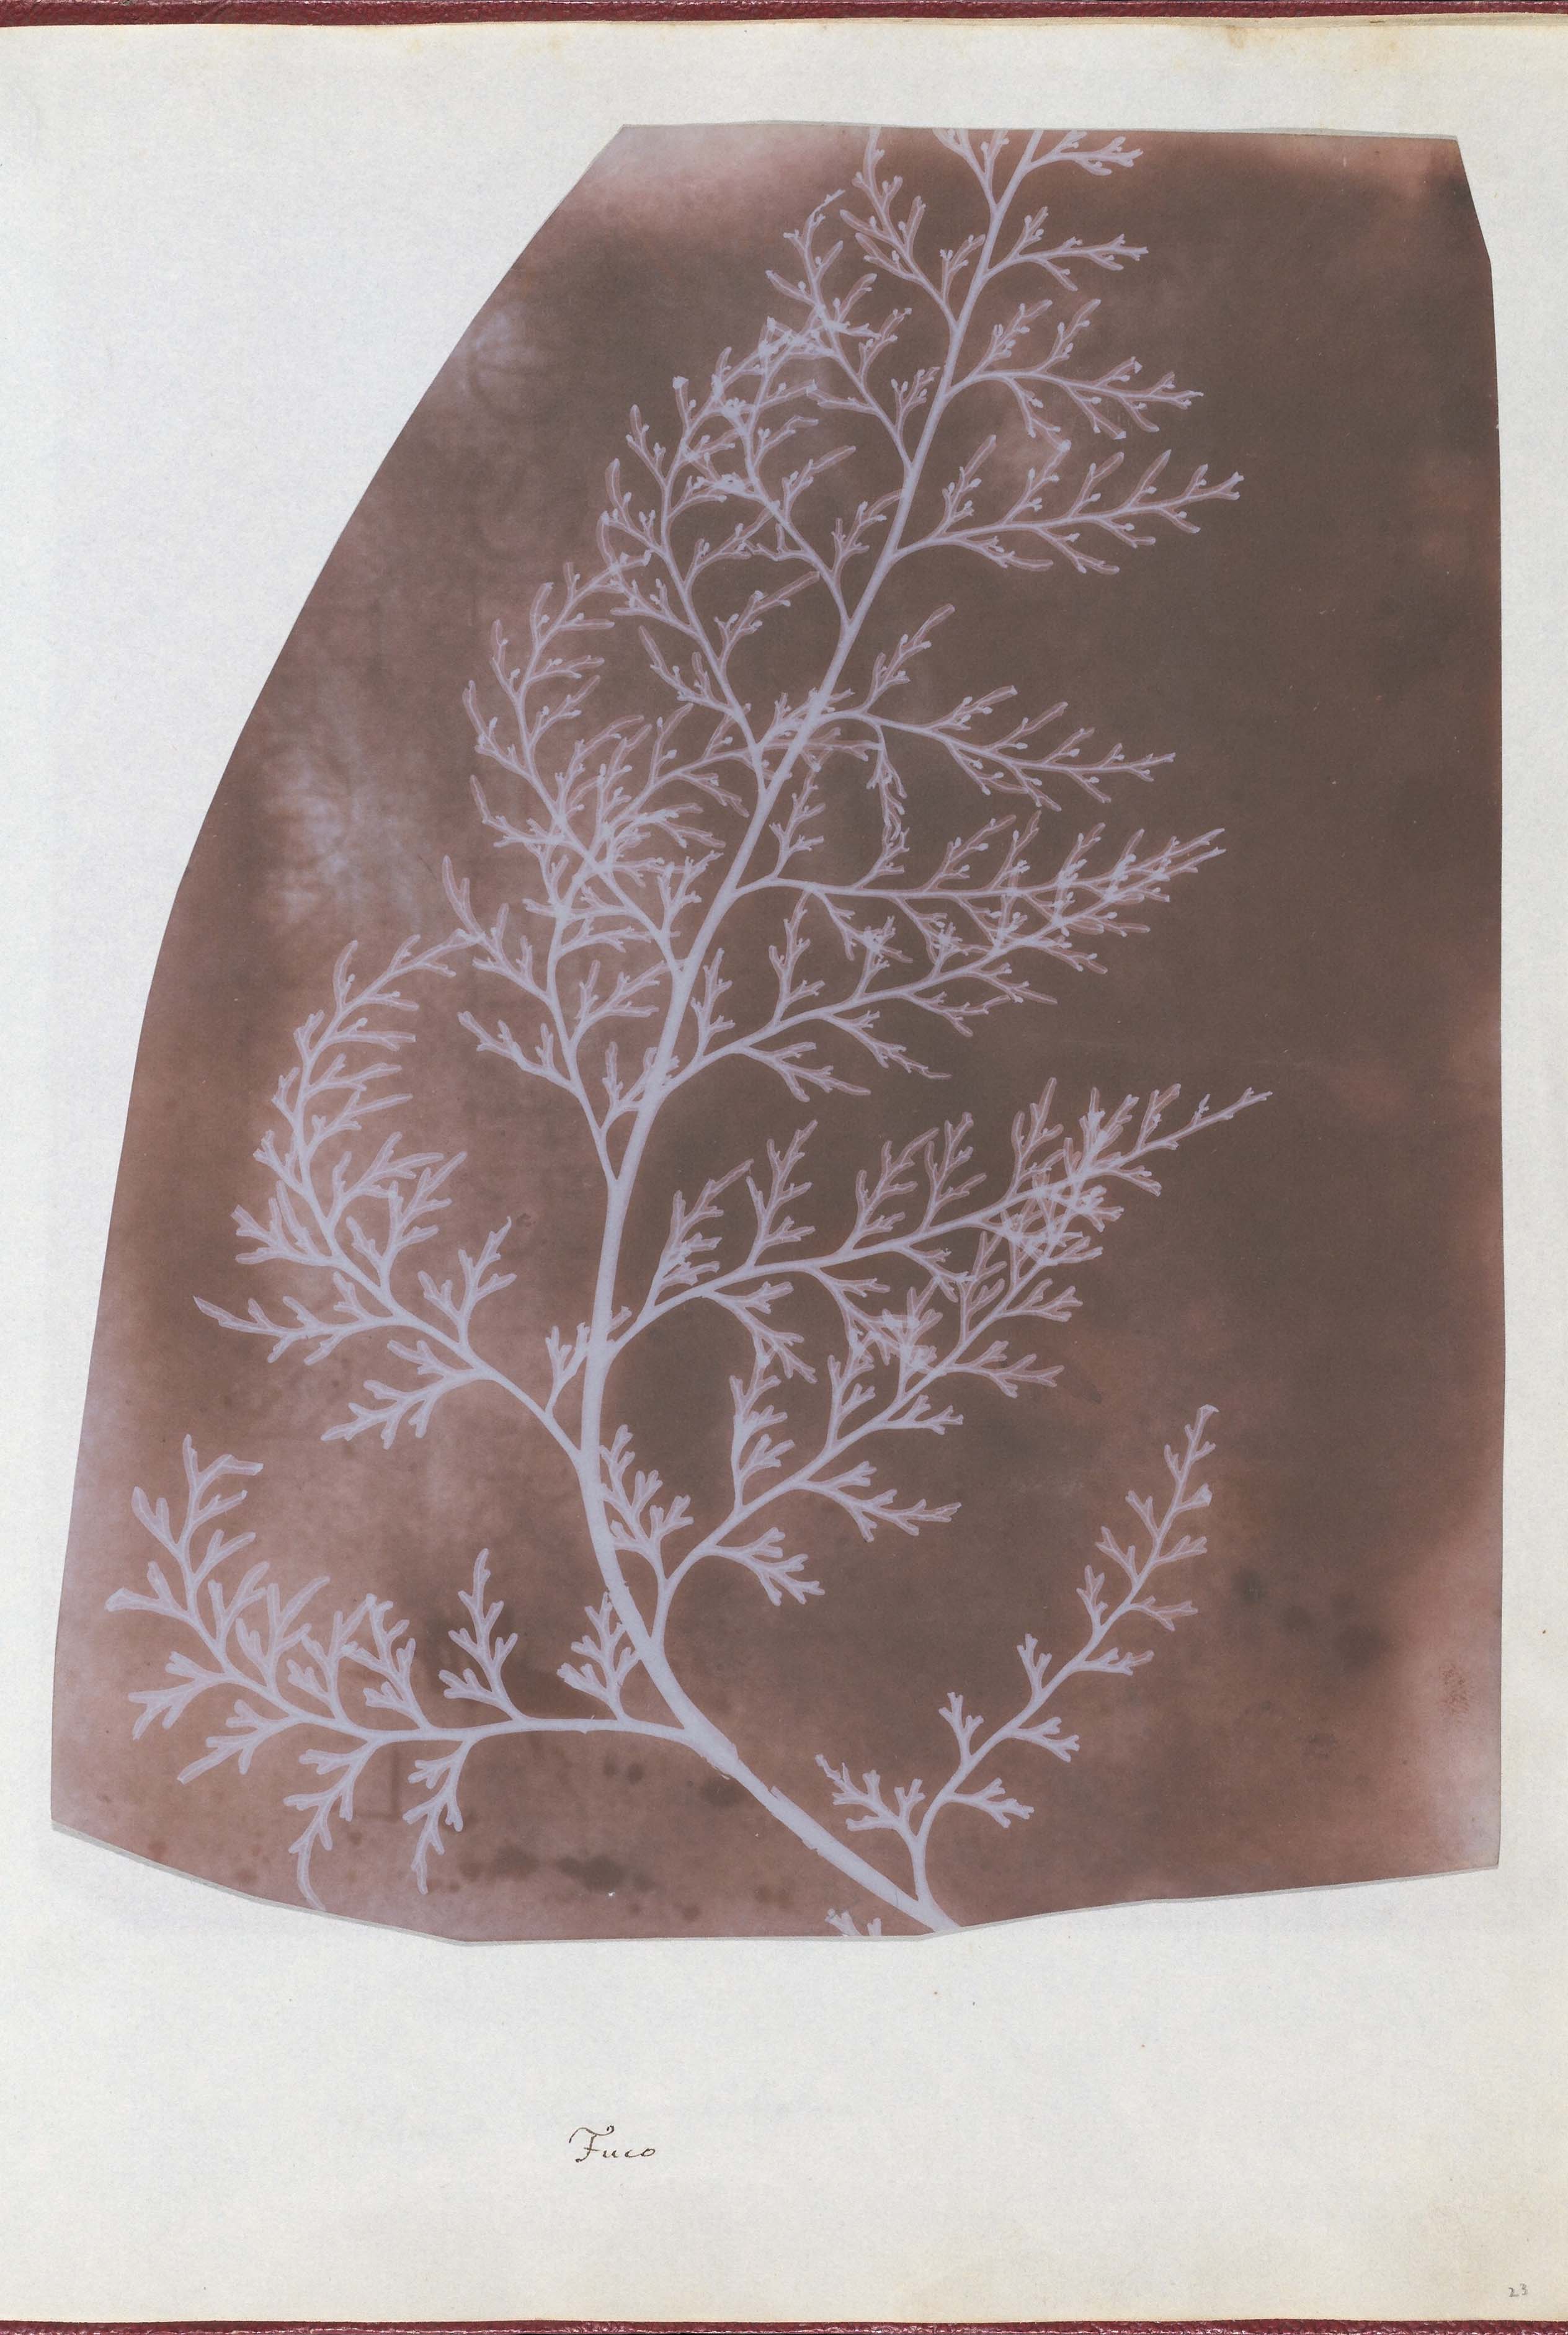 William Henry Fox Talbot :: Wrack (seaweed). Salted paper print, 1839. Photogenic drawing. | src The Met